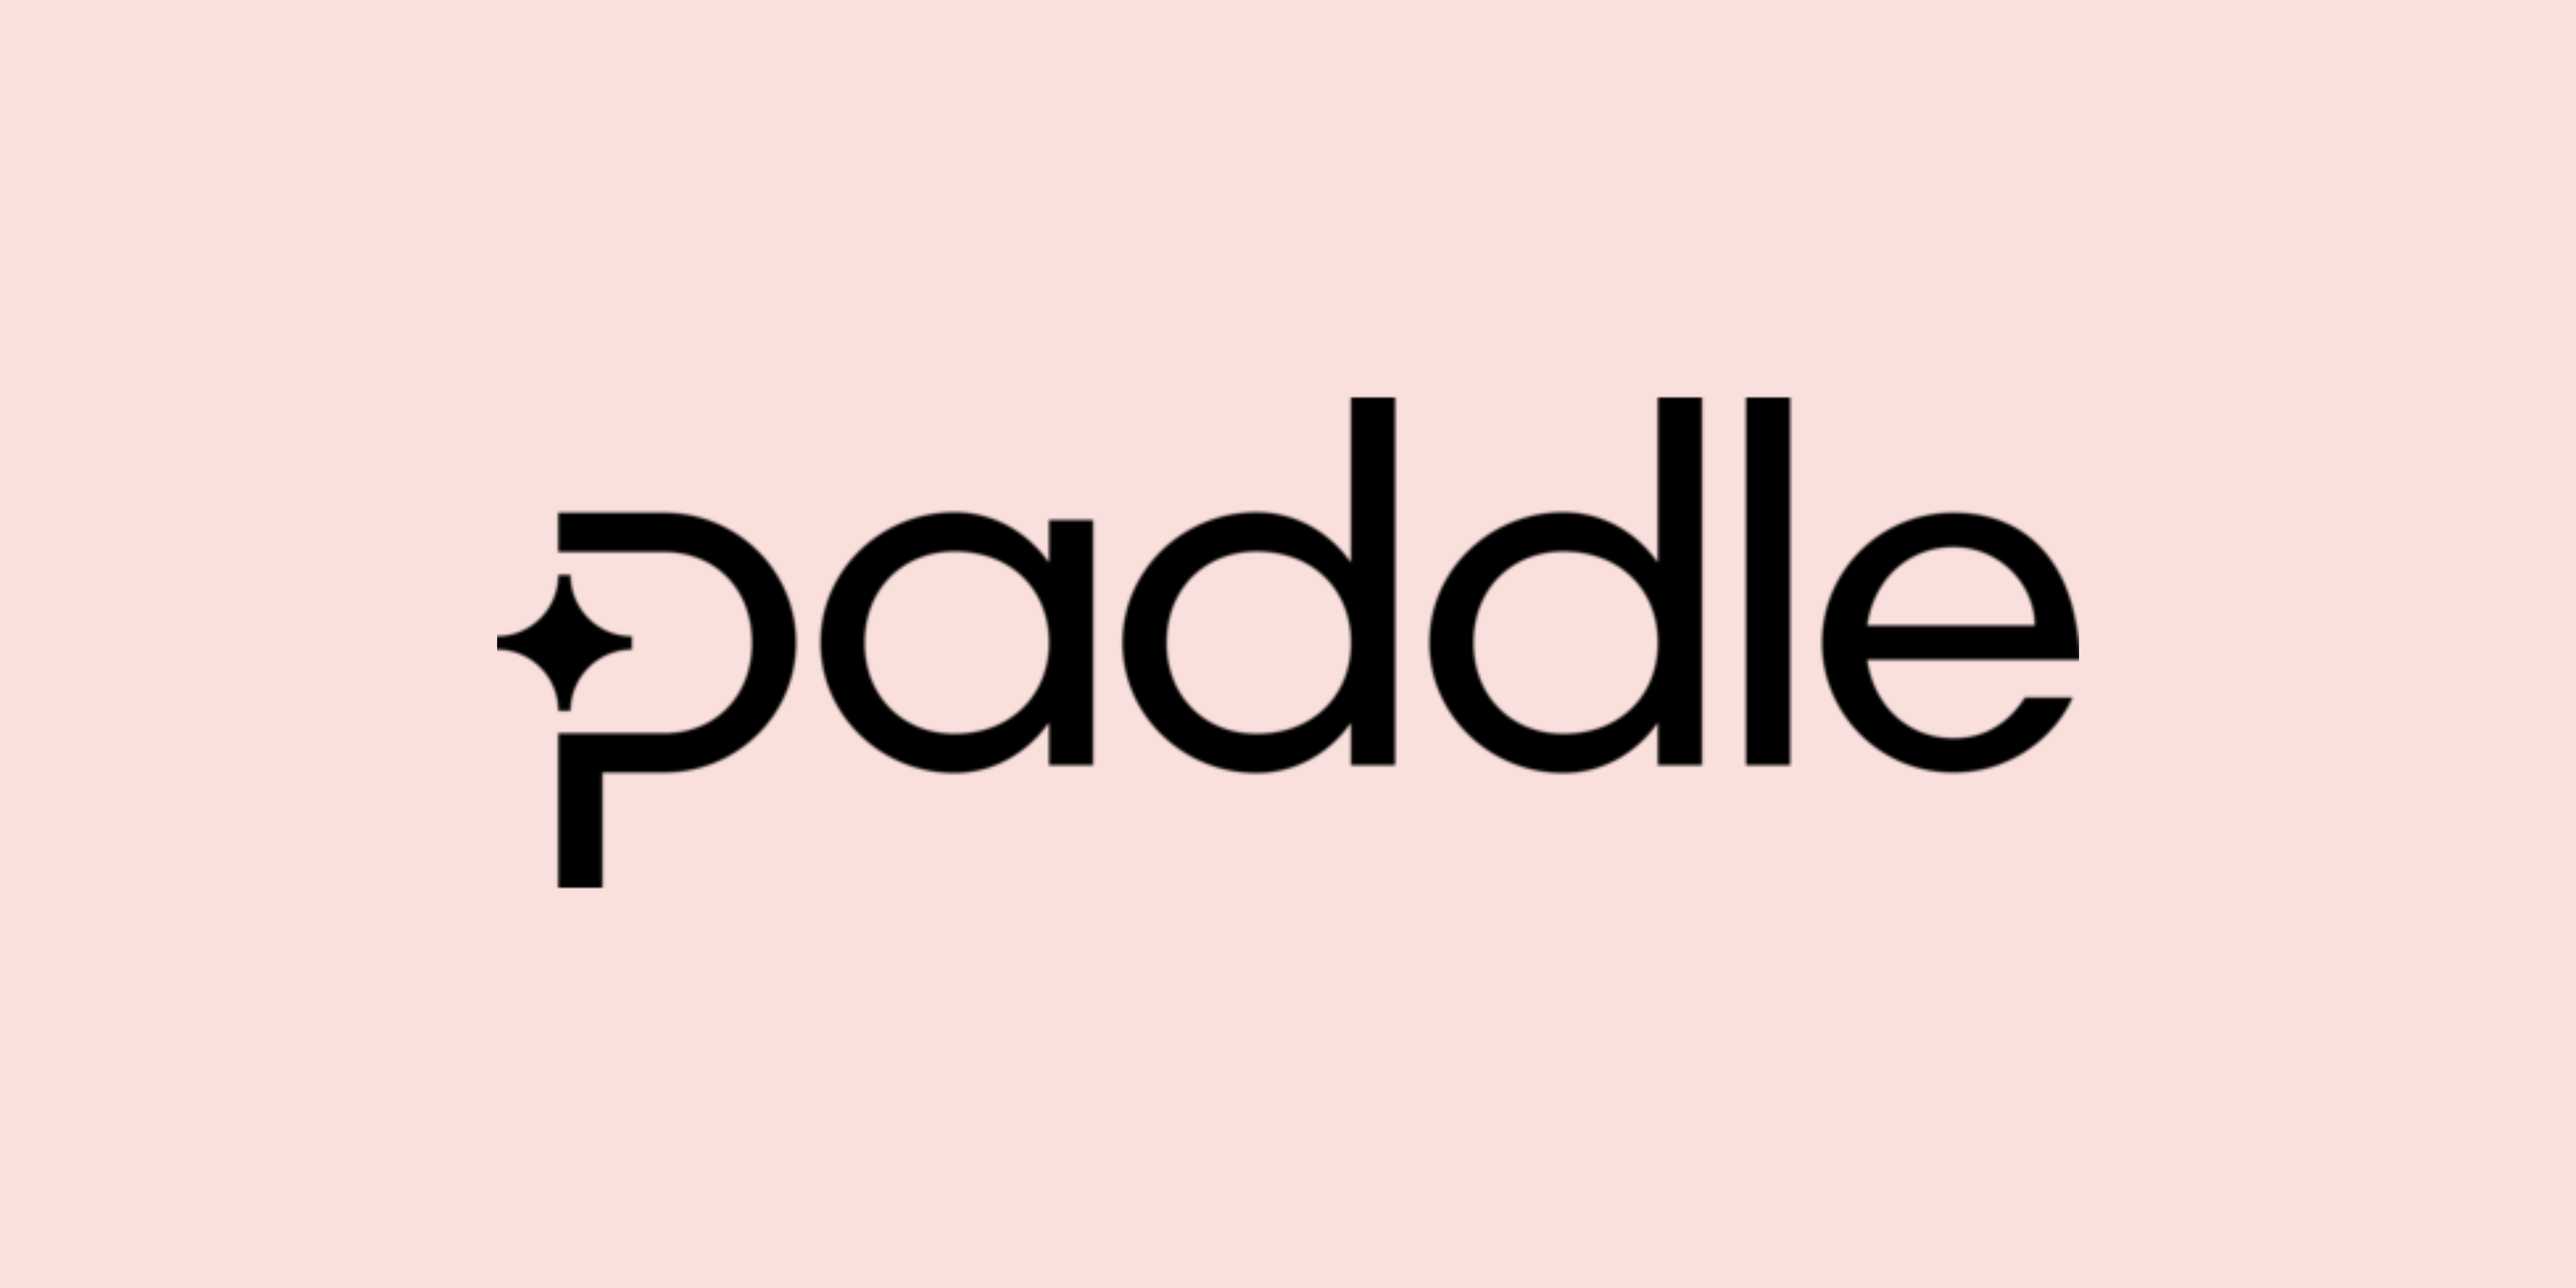 When asking what is Paddle.com? It can be important to consider their brand identity. This image displays the Paddle logo, the word 'Paddle' with a star-like icon as part of the P